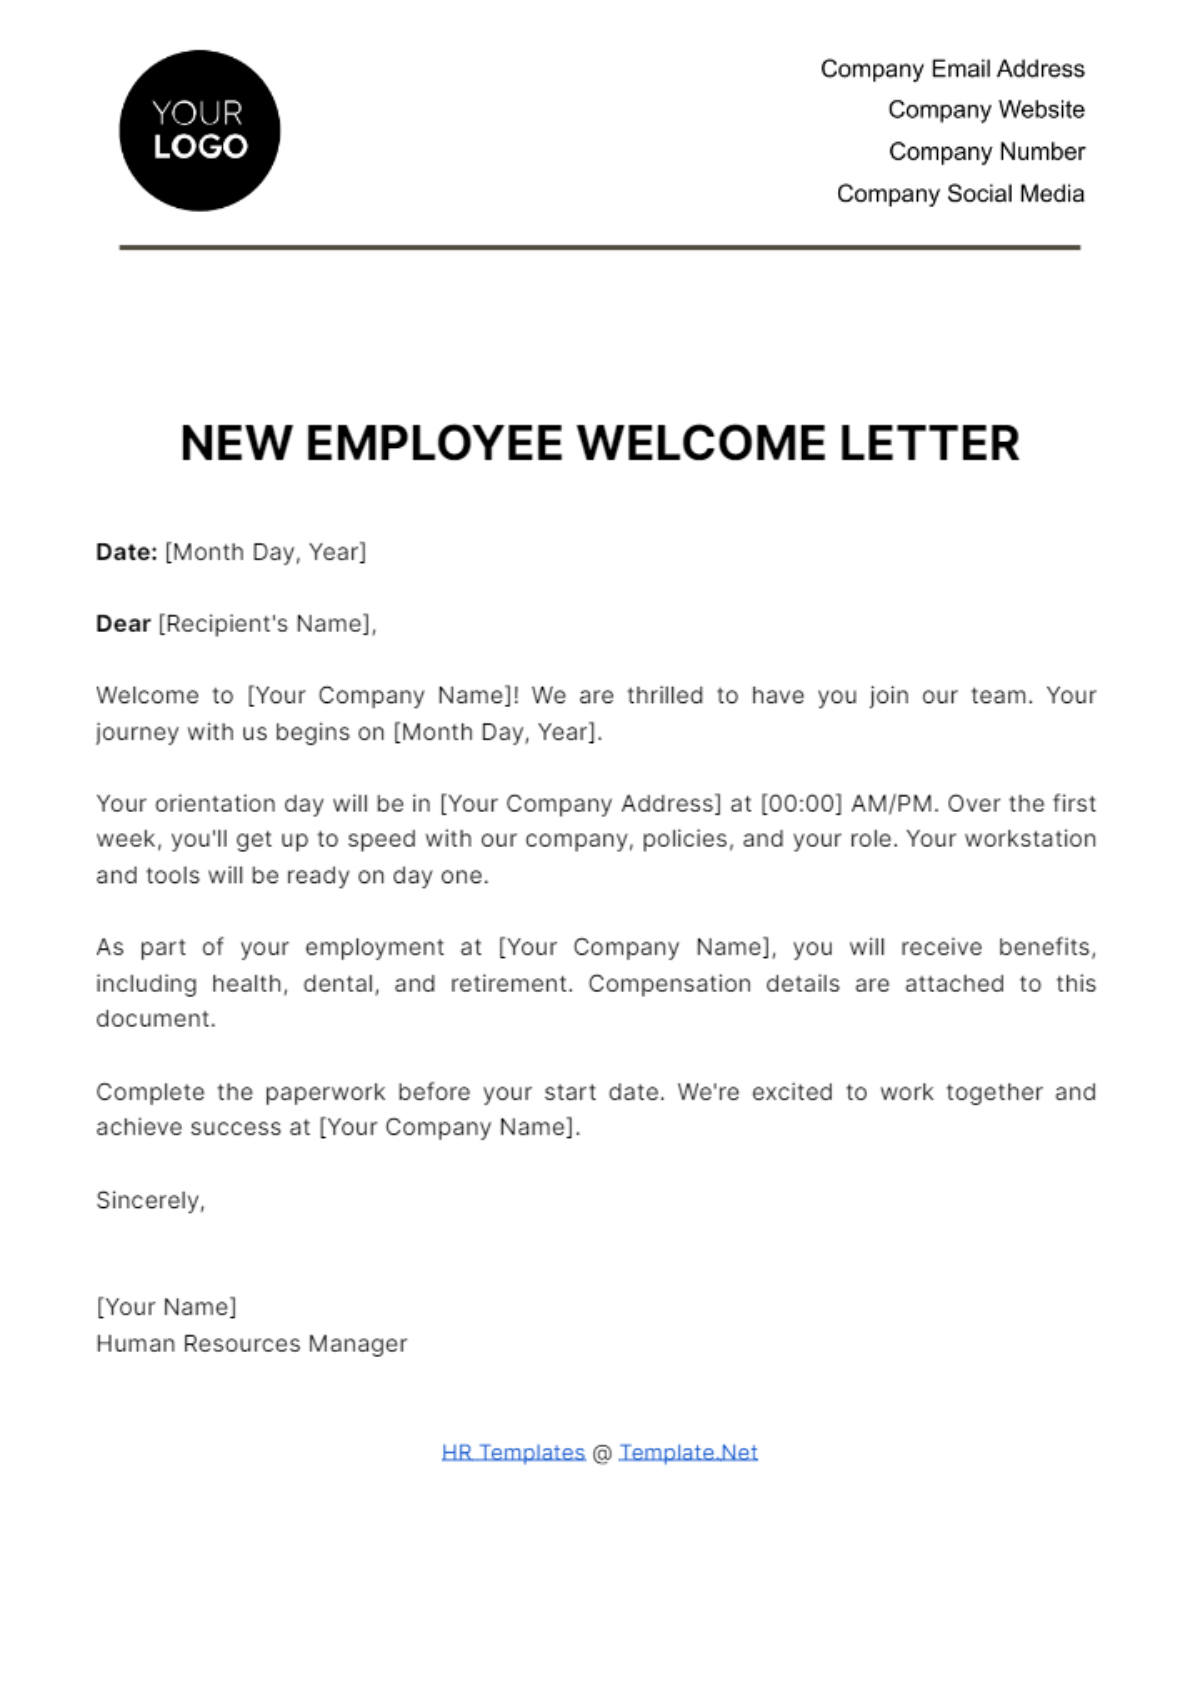 New Employee Welcome Letter HR Template